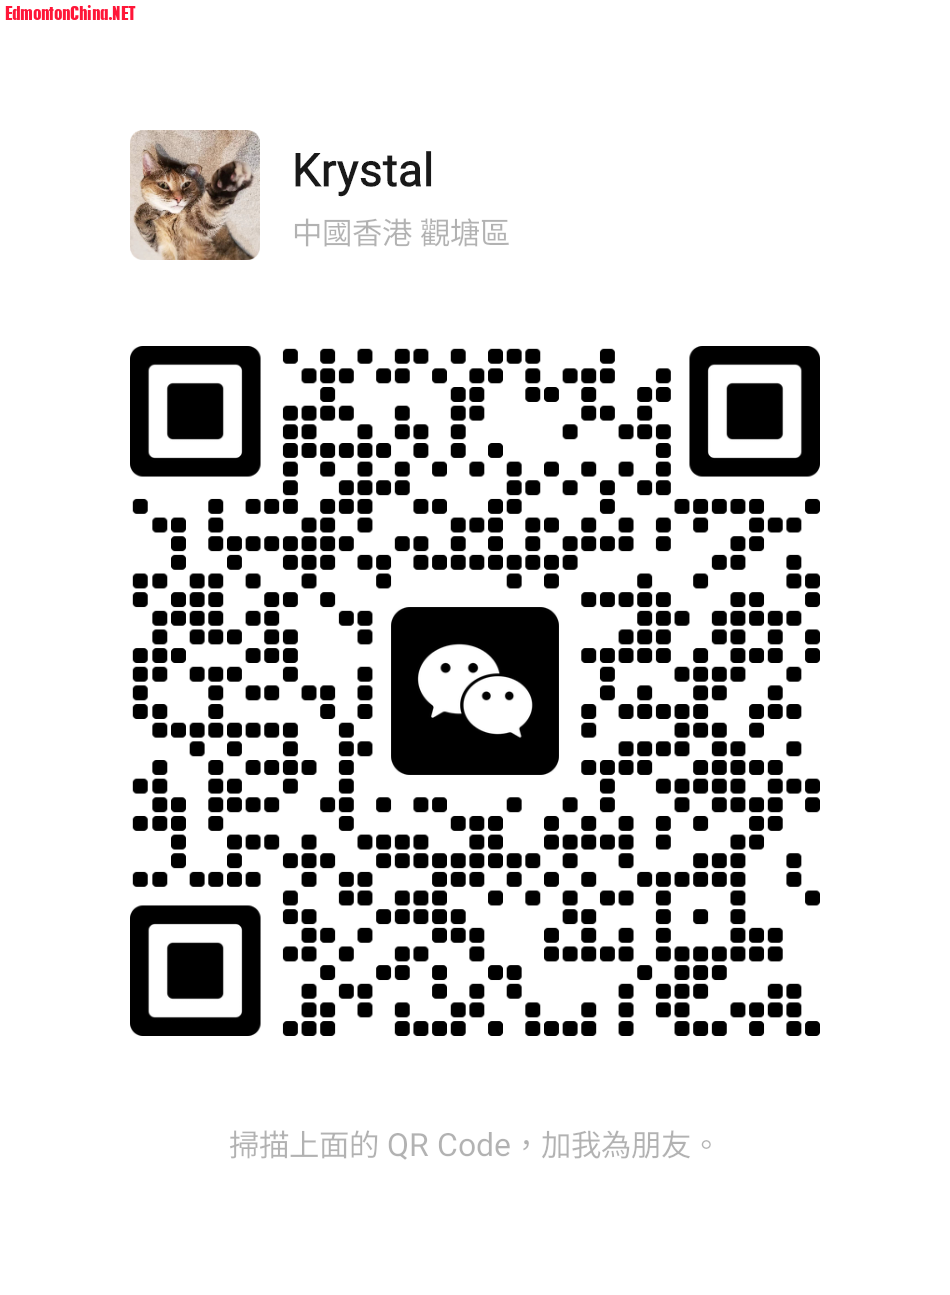 mmqrcode1676516477278.png